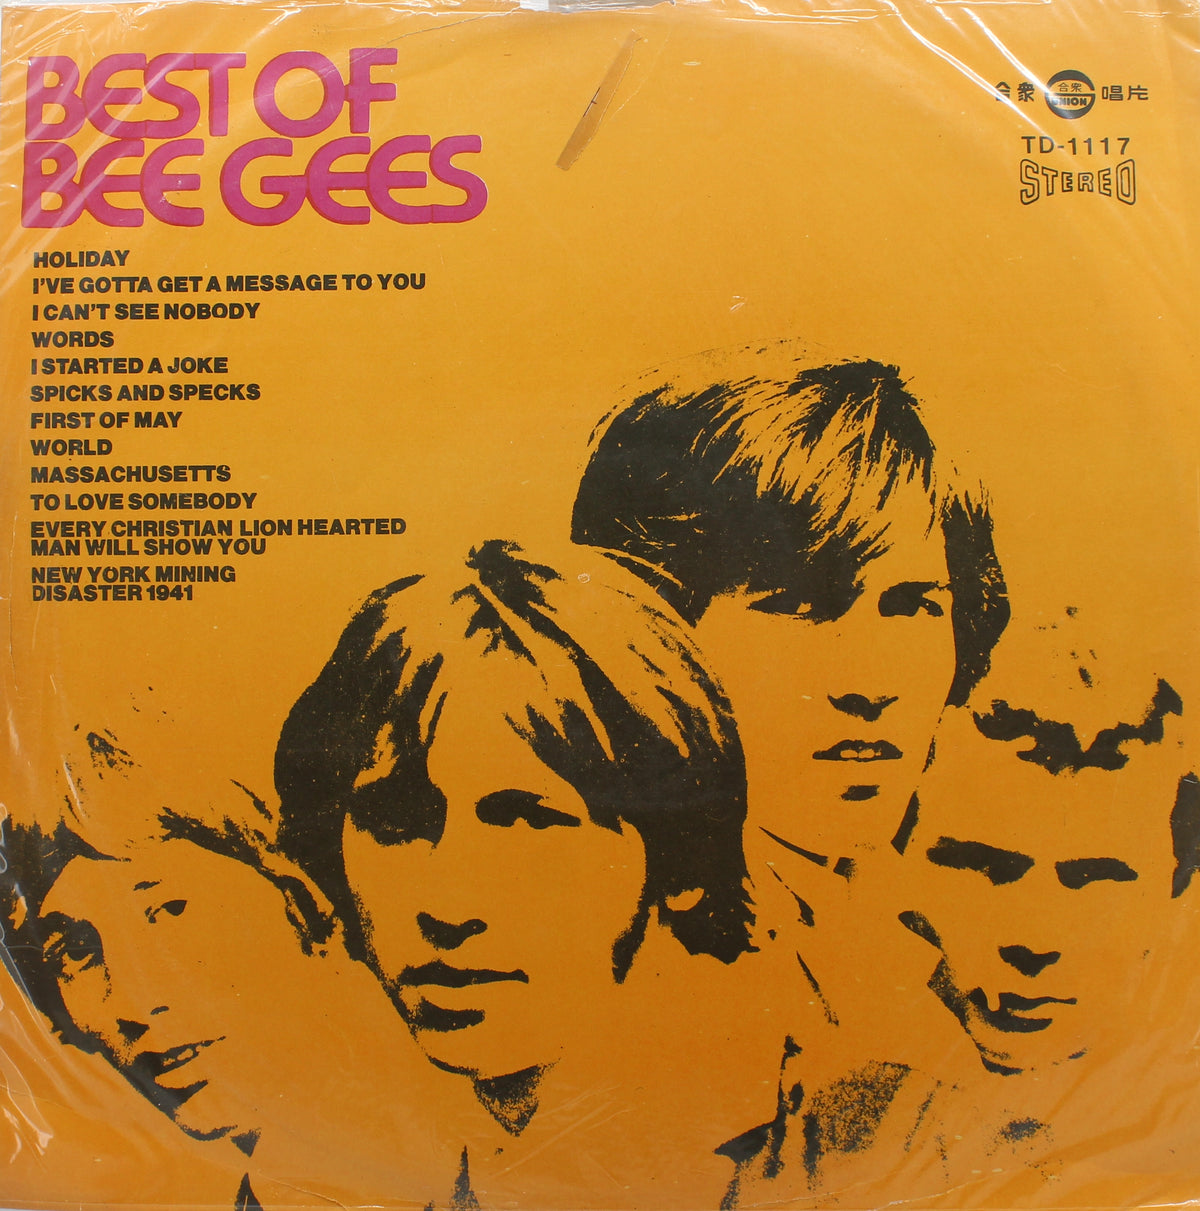 Bee Gees - Best Of, Vinyl, LP, Compilation, Unofficial Release, Taiwan 1969